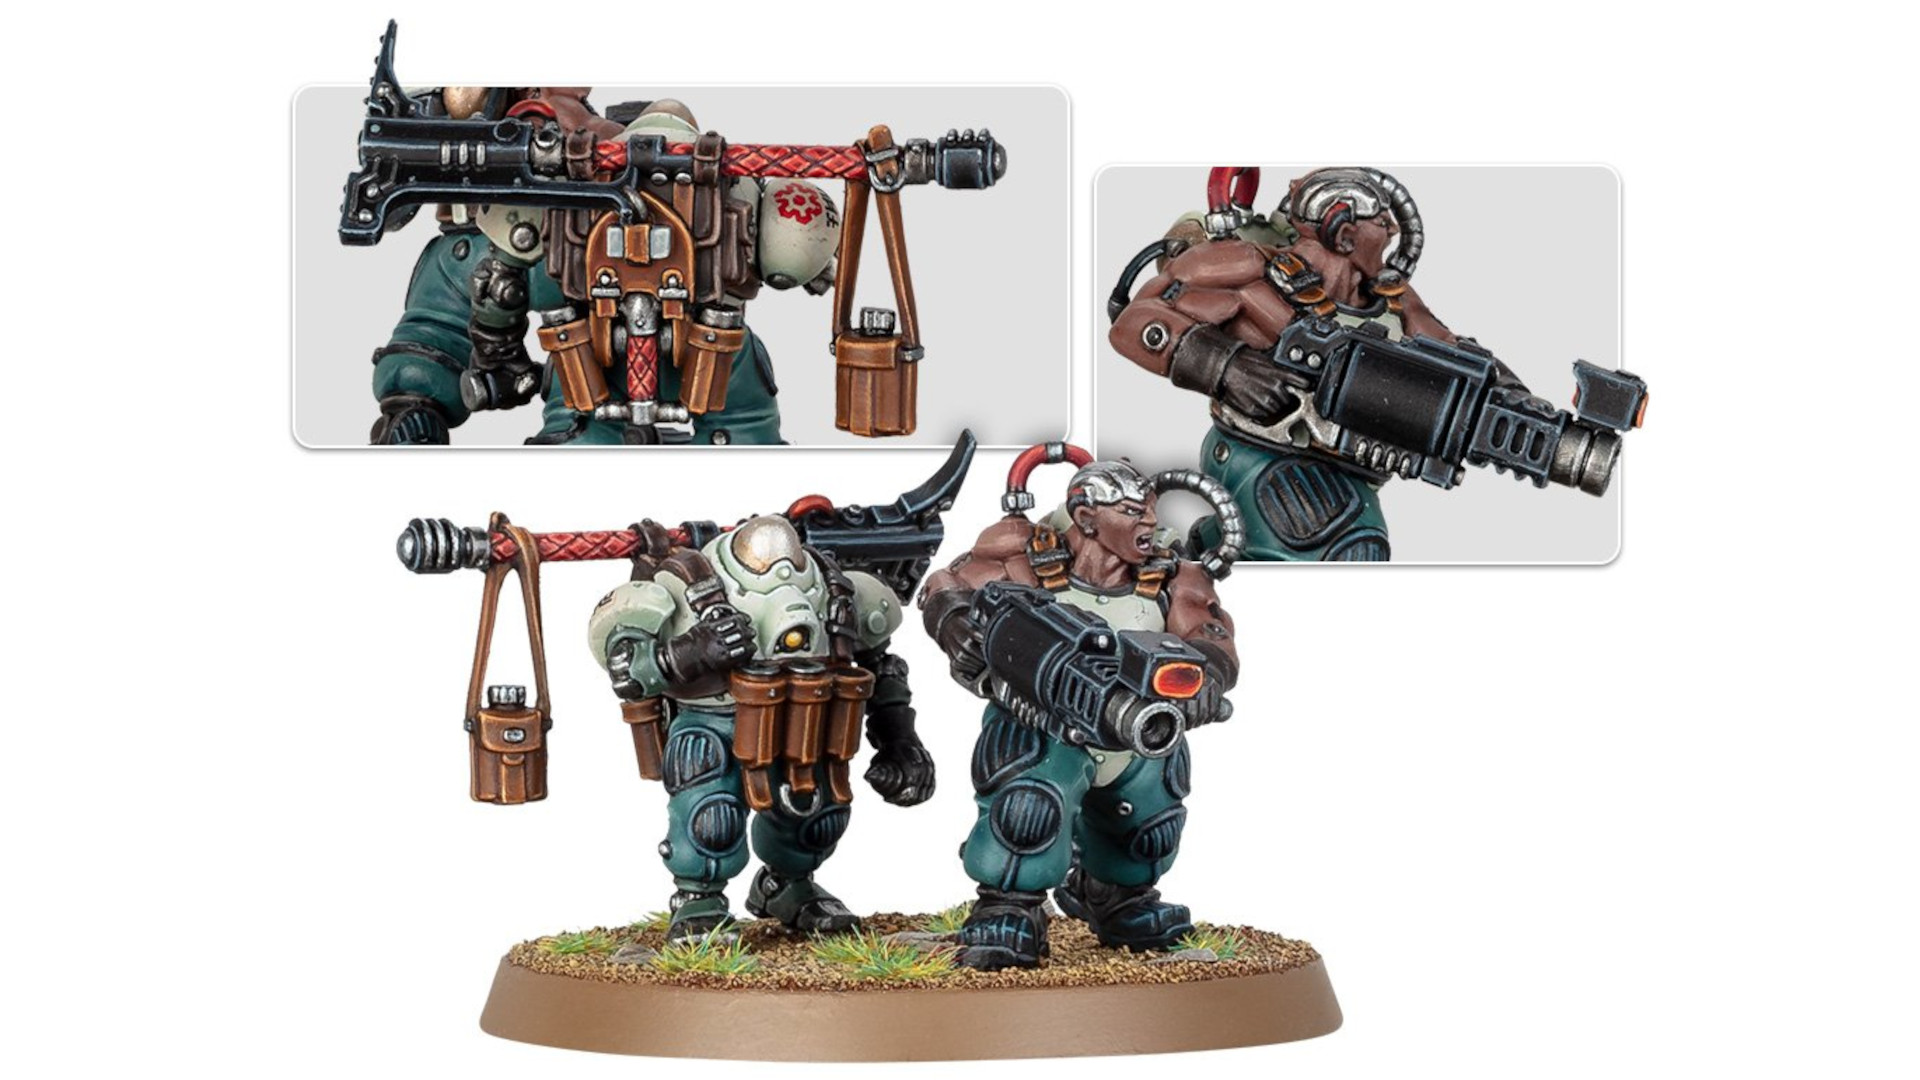 Warhammer 40k Leagues of Votann guide - Games Workshop photo showing the Cthonian Beserks Mole Grenade Launcher model